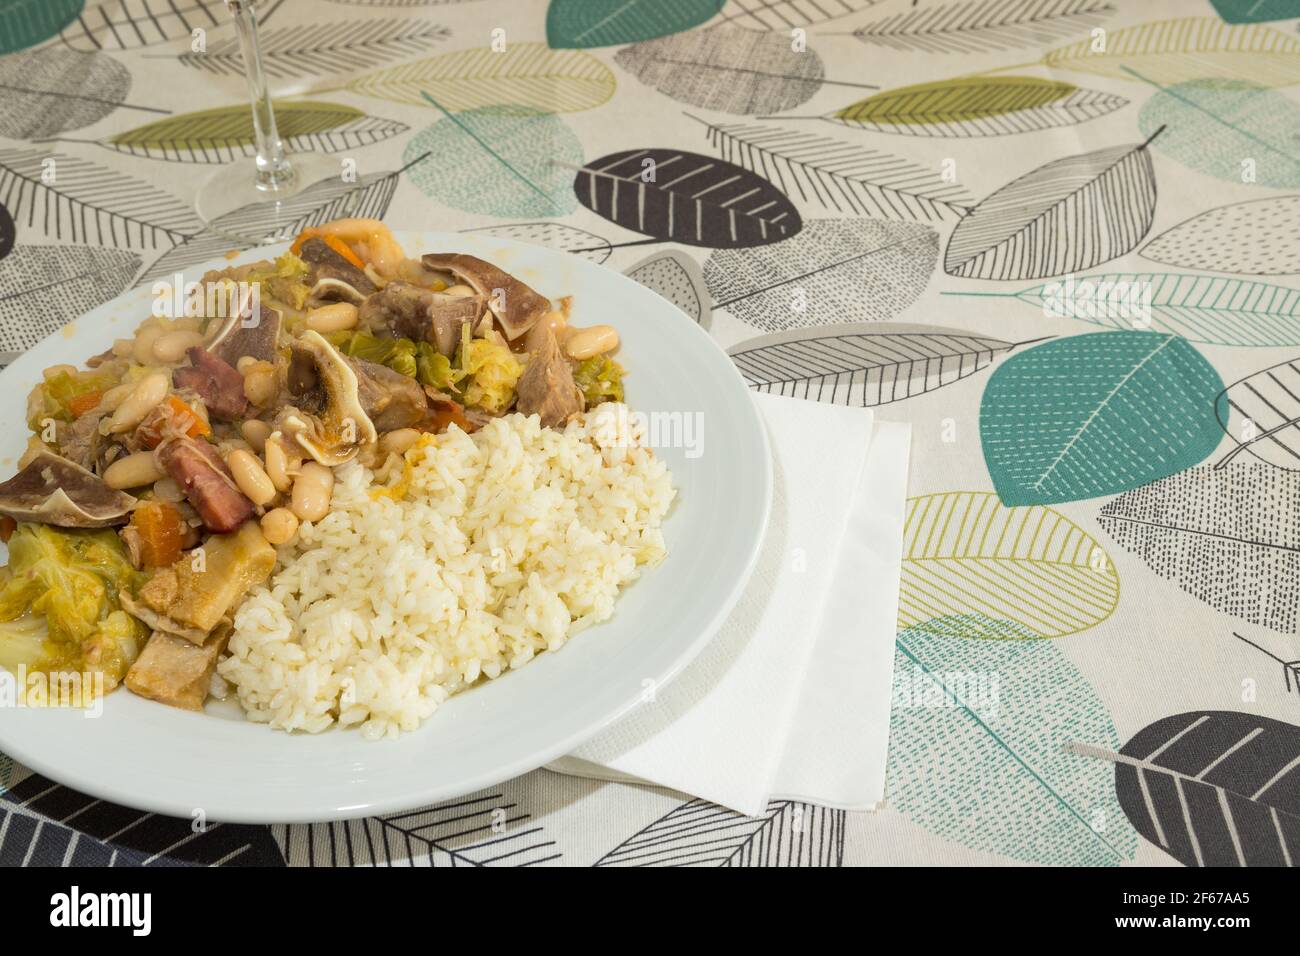 Homemade 'Feijoada' ready to eat. It is a typical portuguese dish made of boiled white beans, vegetables, beef and pork meats served with rice. Stock Photo